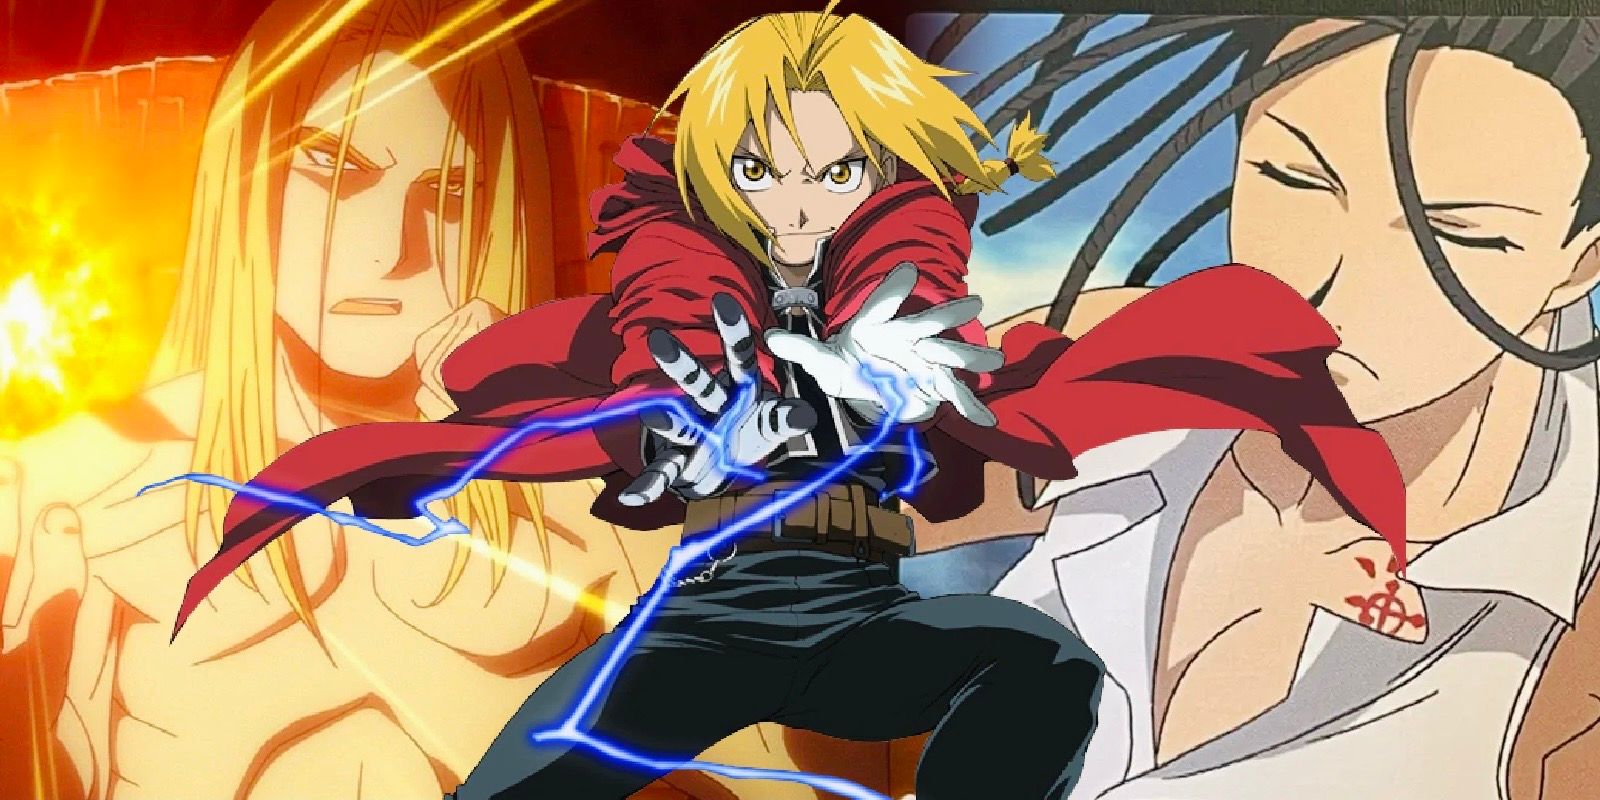 Edward Elric uses alchemy in front of Father and Izumi from Fullmetal Alchemist